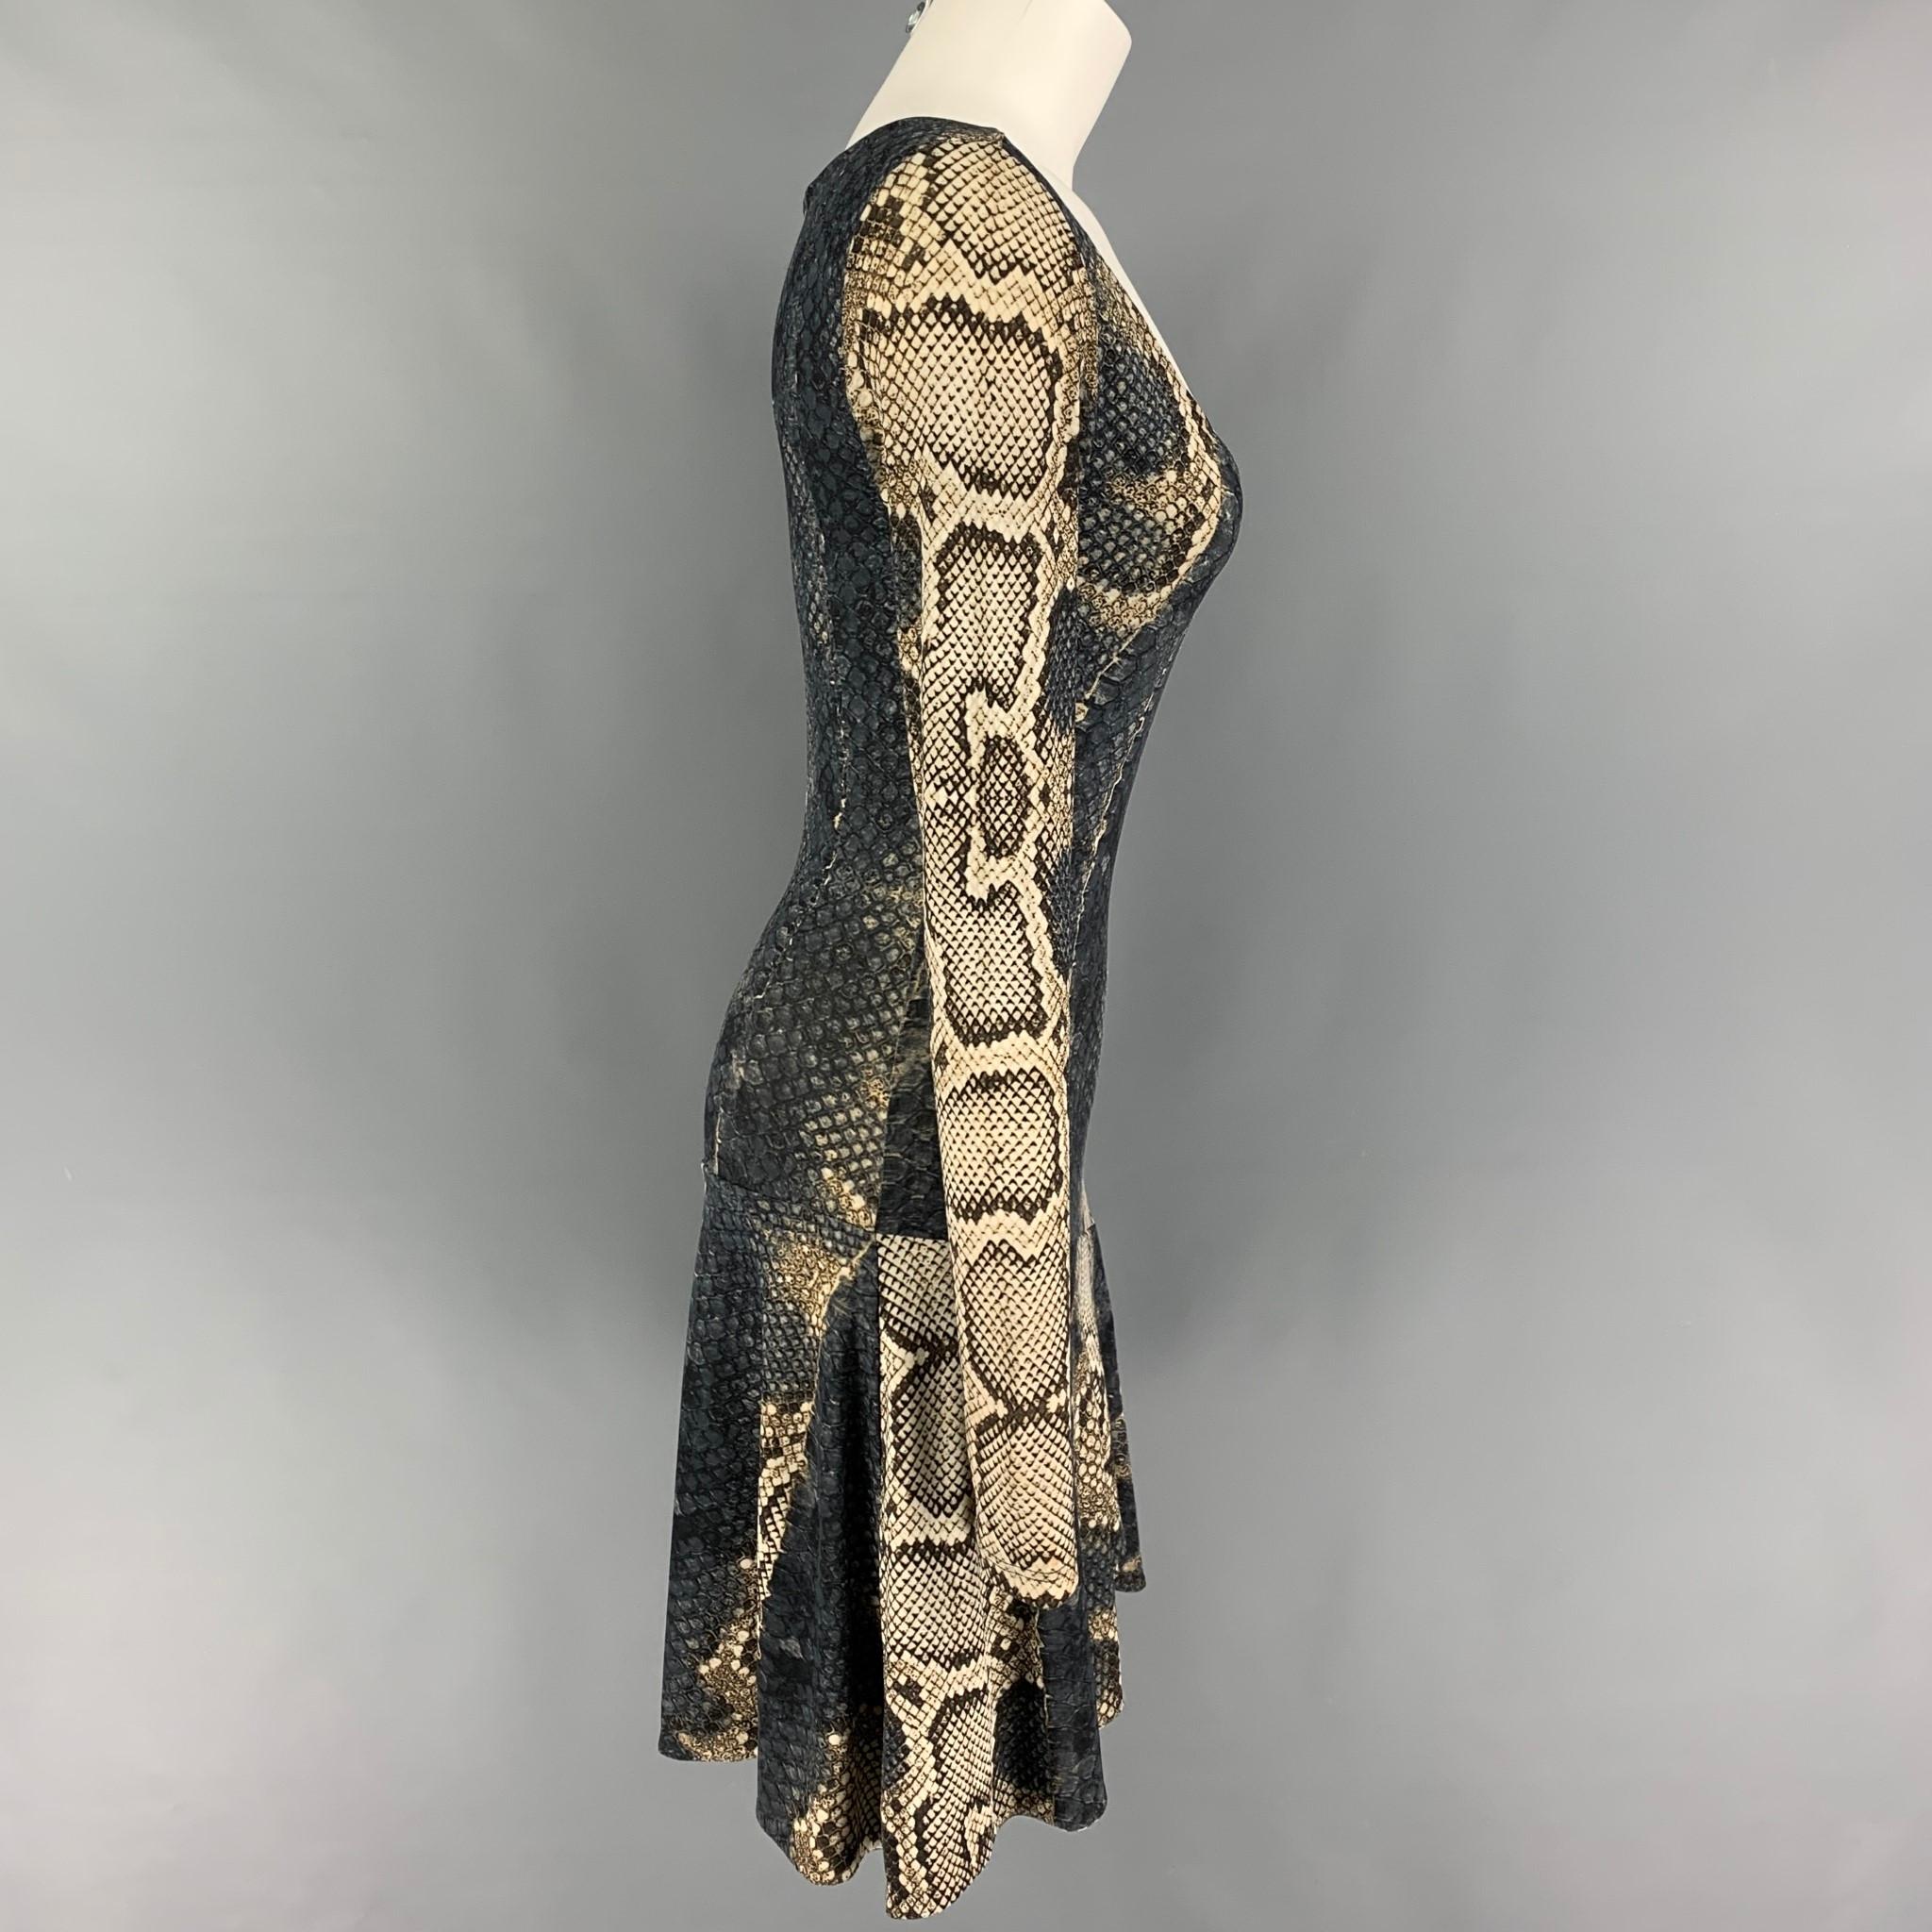 ROBERTO CAVALLI dress comes in a brown & beige snake skin print polyamide / elastane featuring long sleeves, a-line style, and a deep v-neck. Made in Italy. 

Very Good Pre-Owned Condition.
Marked: 38

Measurements:

Shoulder: 14.5 in.
Bust: 29